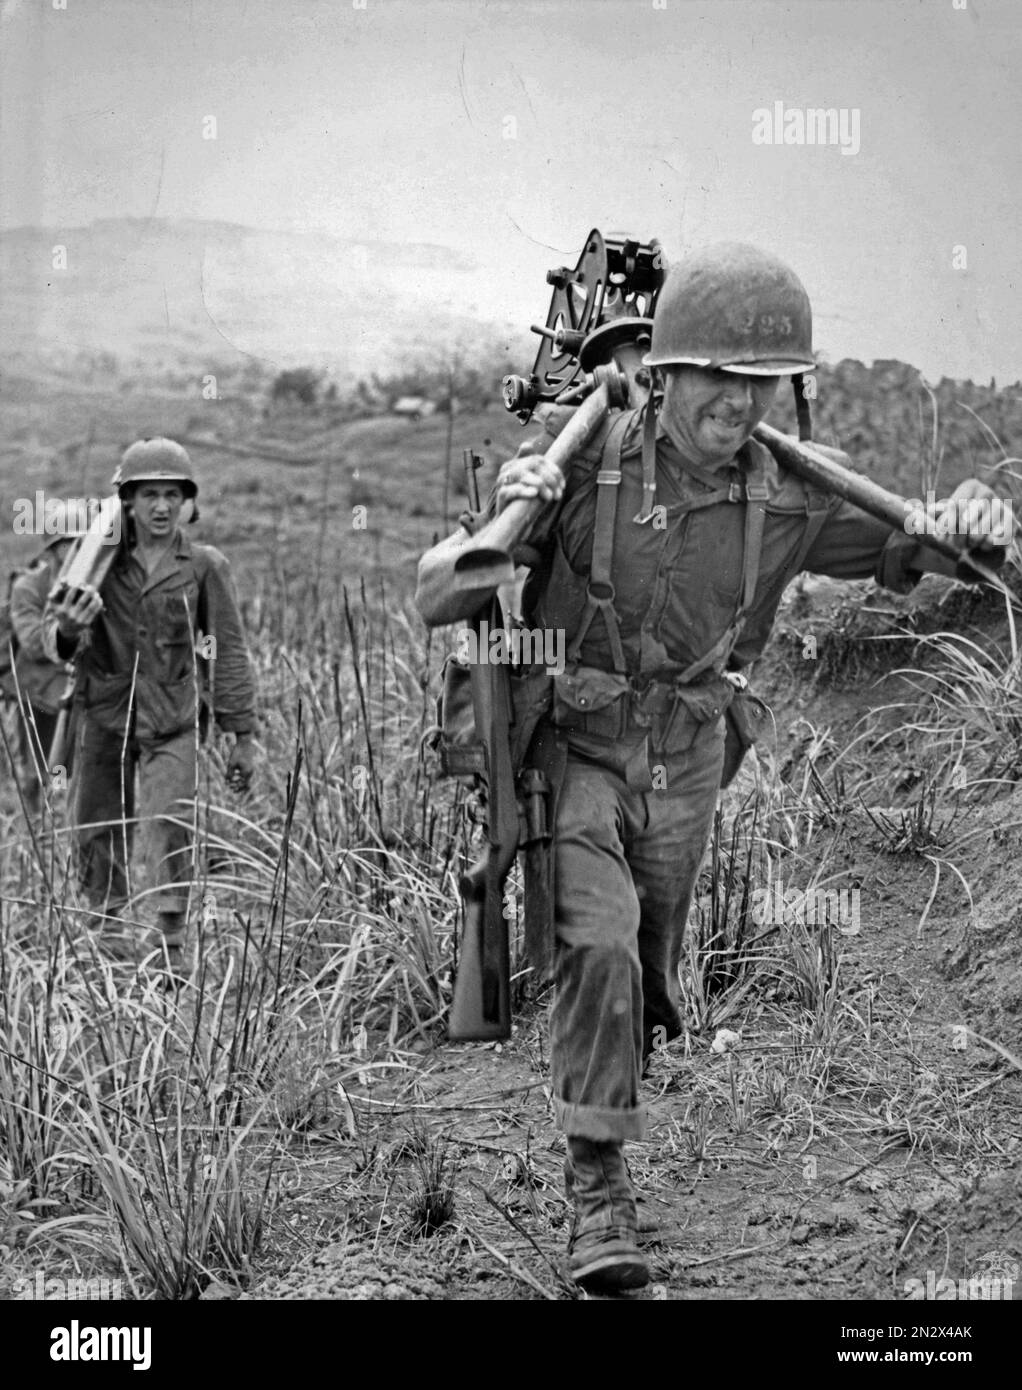 GUAM, MARIANA ISLANDS - August / September 1944 - US Marines move a .30 Browning heavy machine gun during the Second Battle of Guam in the Mariana Isl Stock Photo